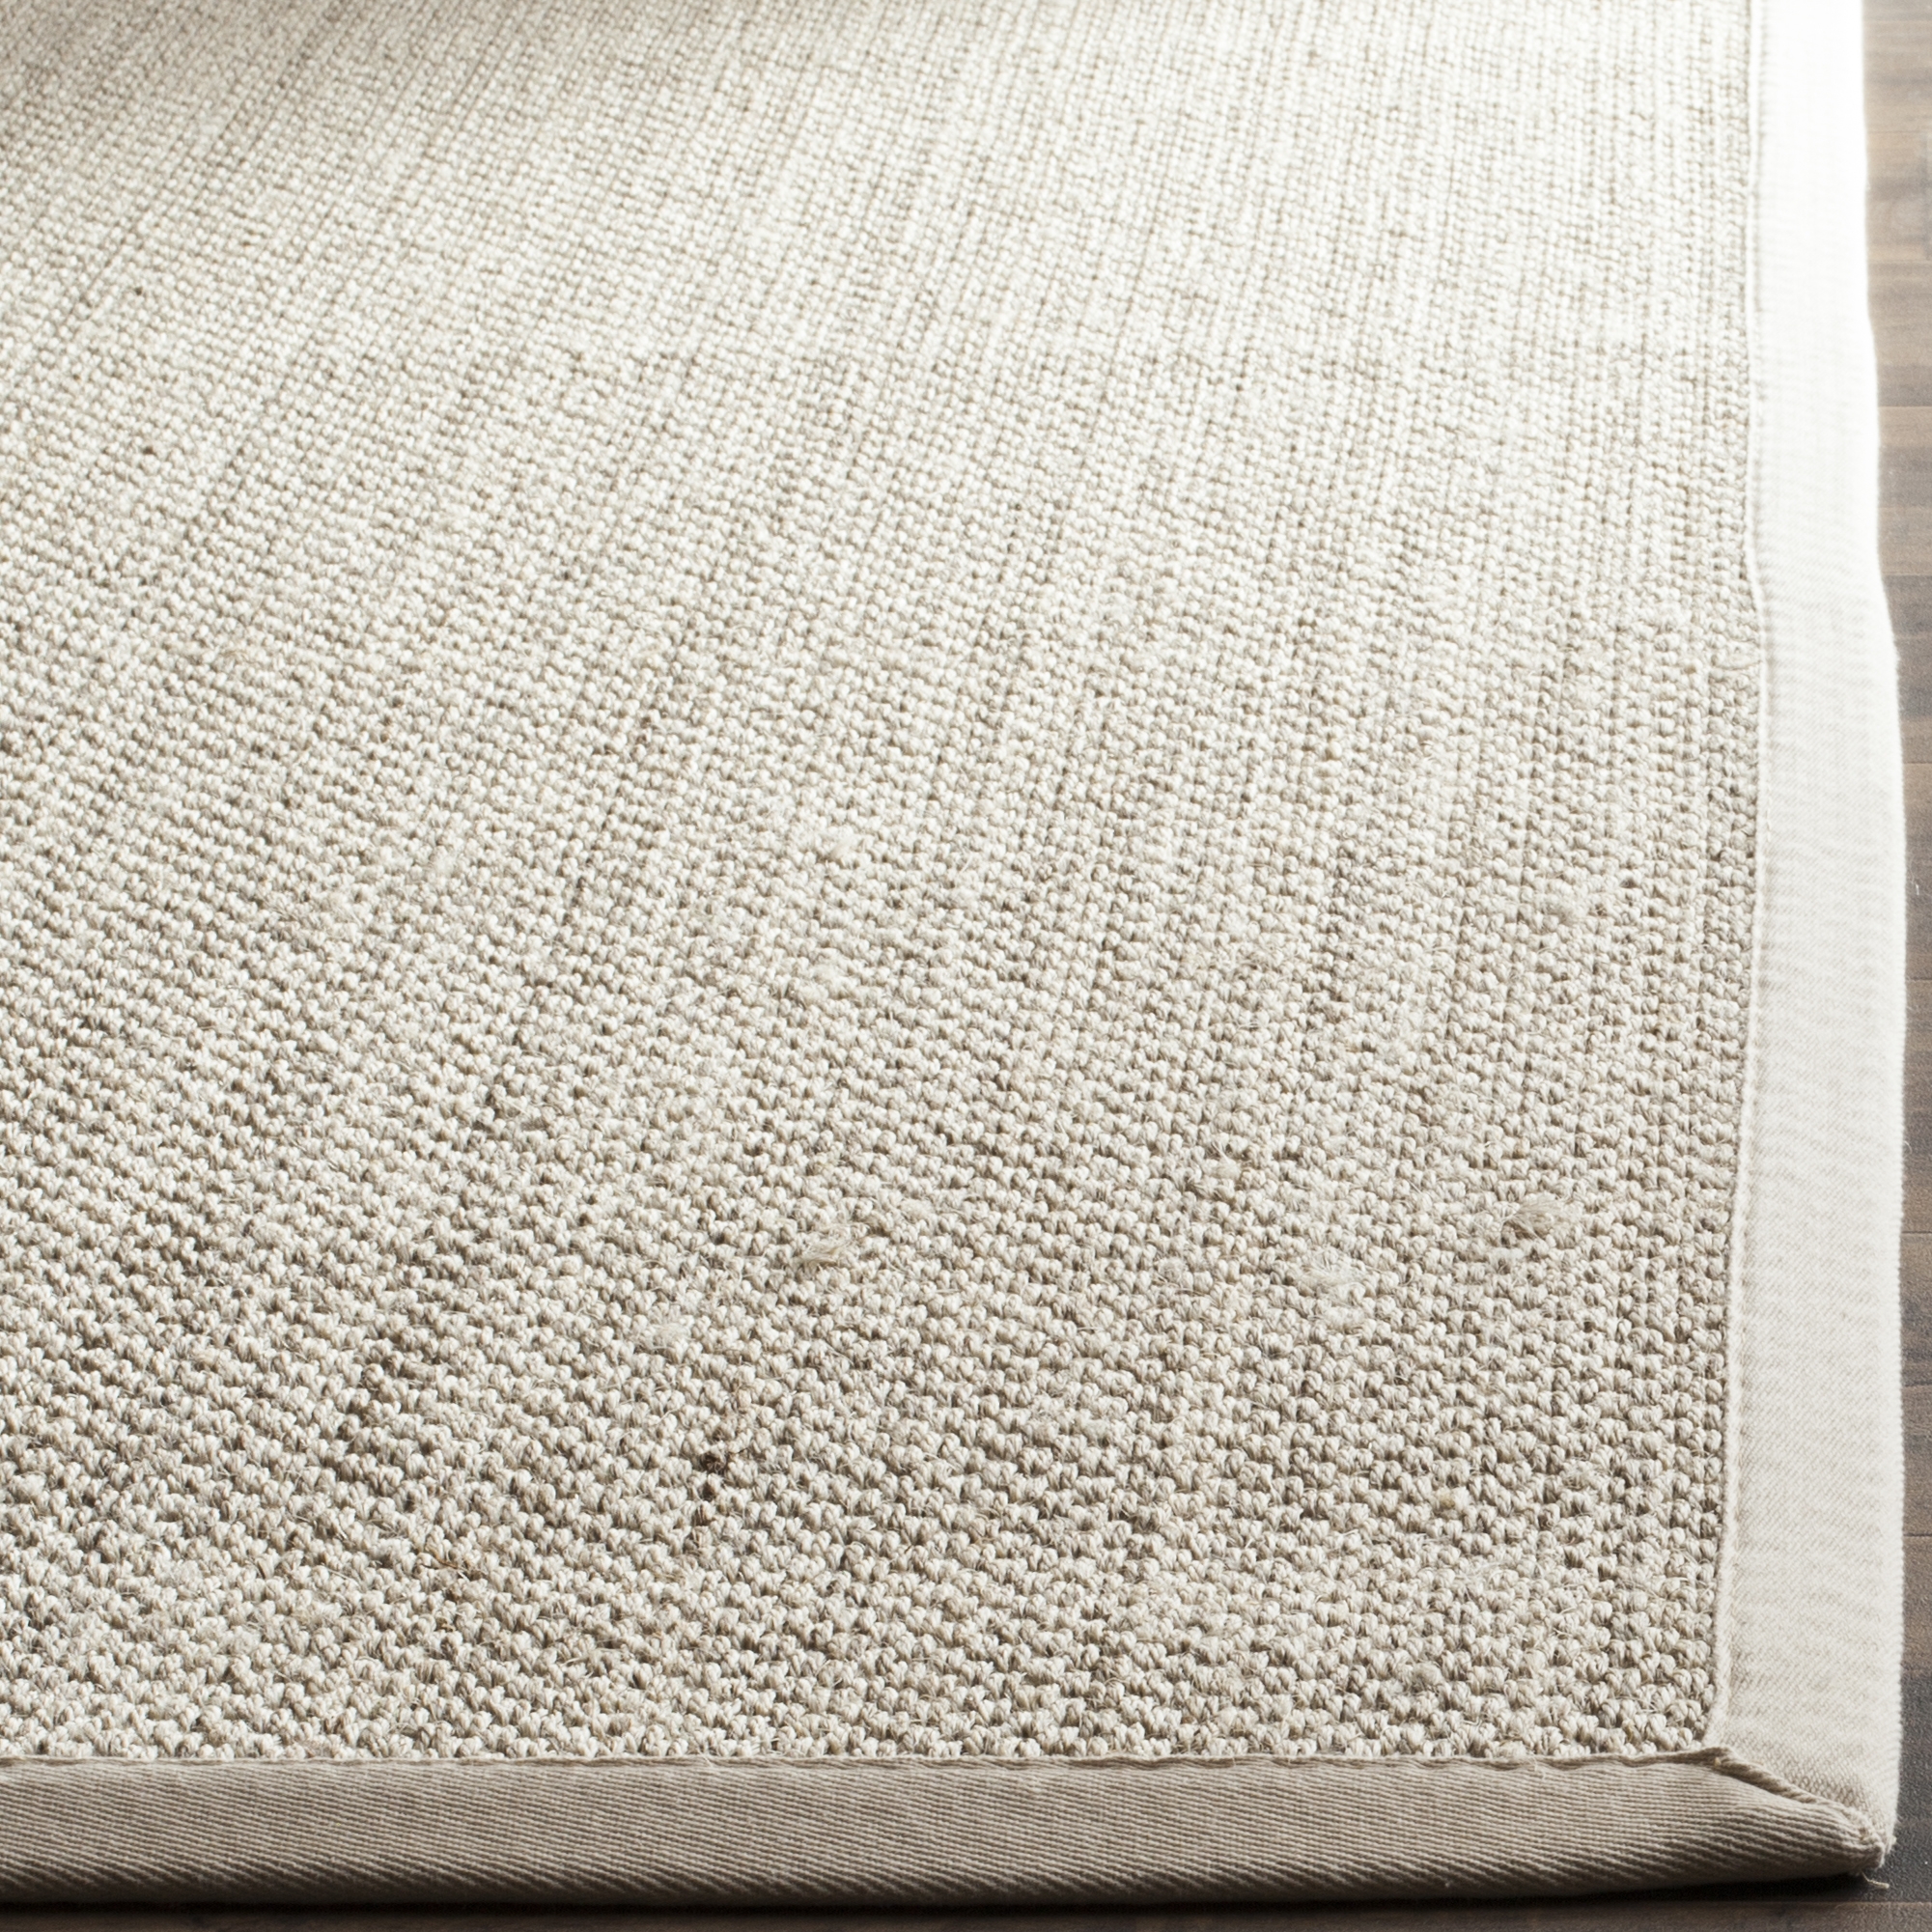 Arlo Home Woven Area Rug, NF143C, Marble/Beige,  8' X 10' - Image 2